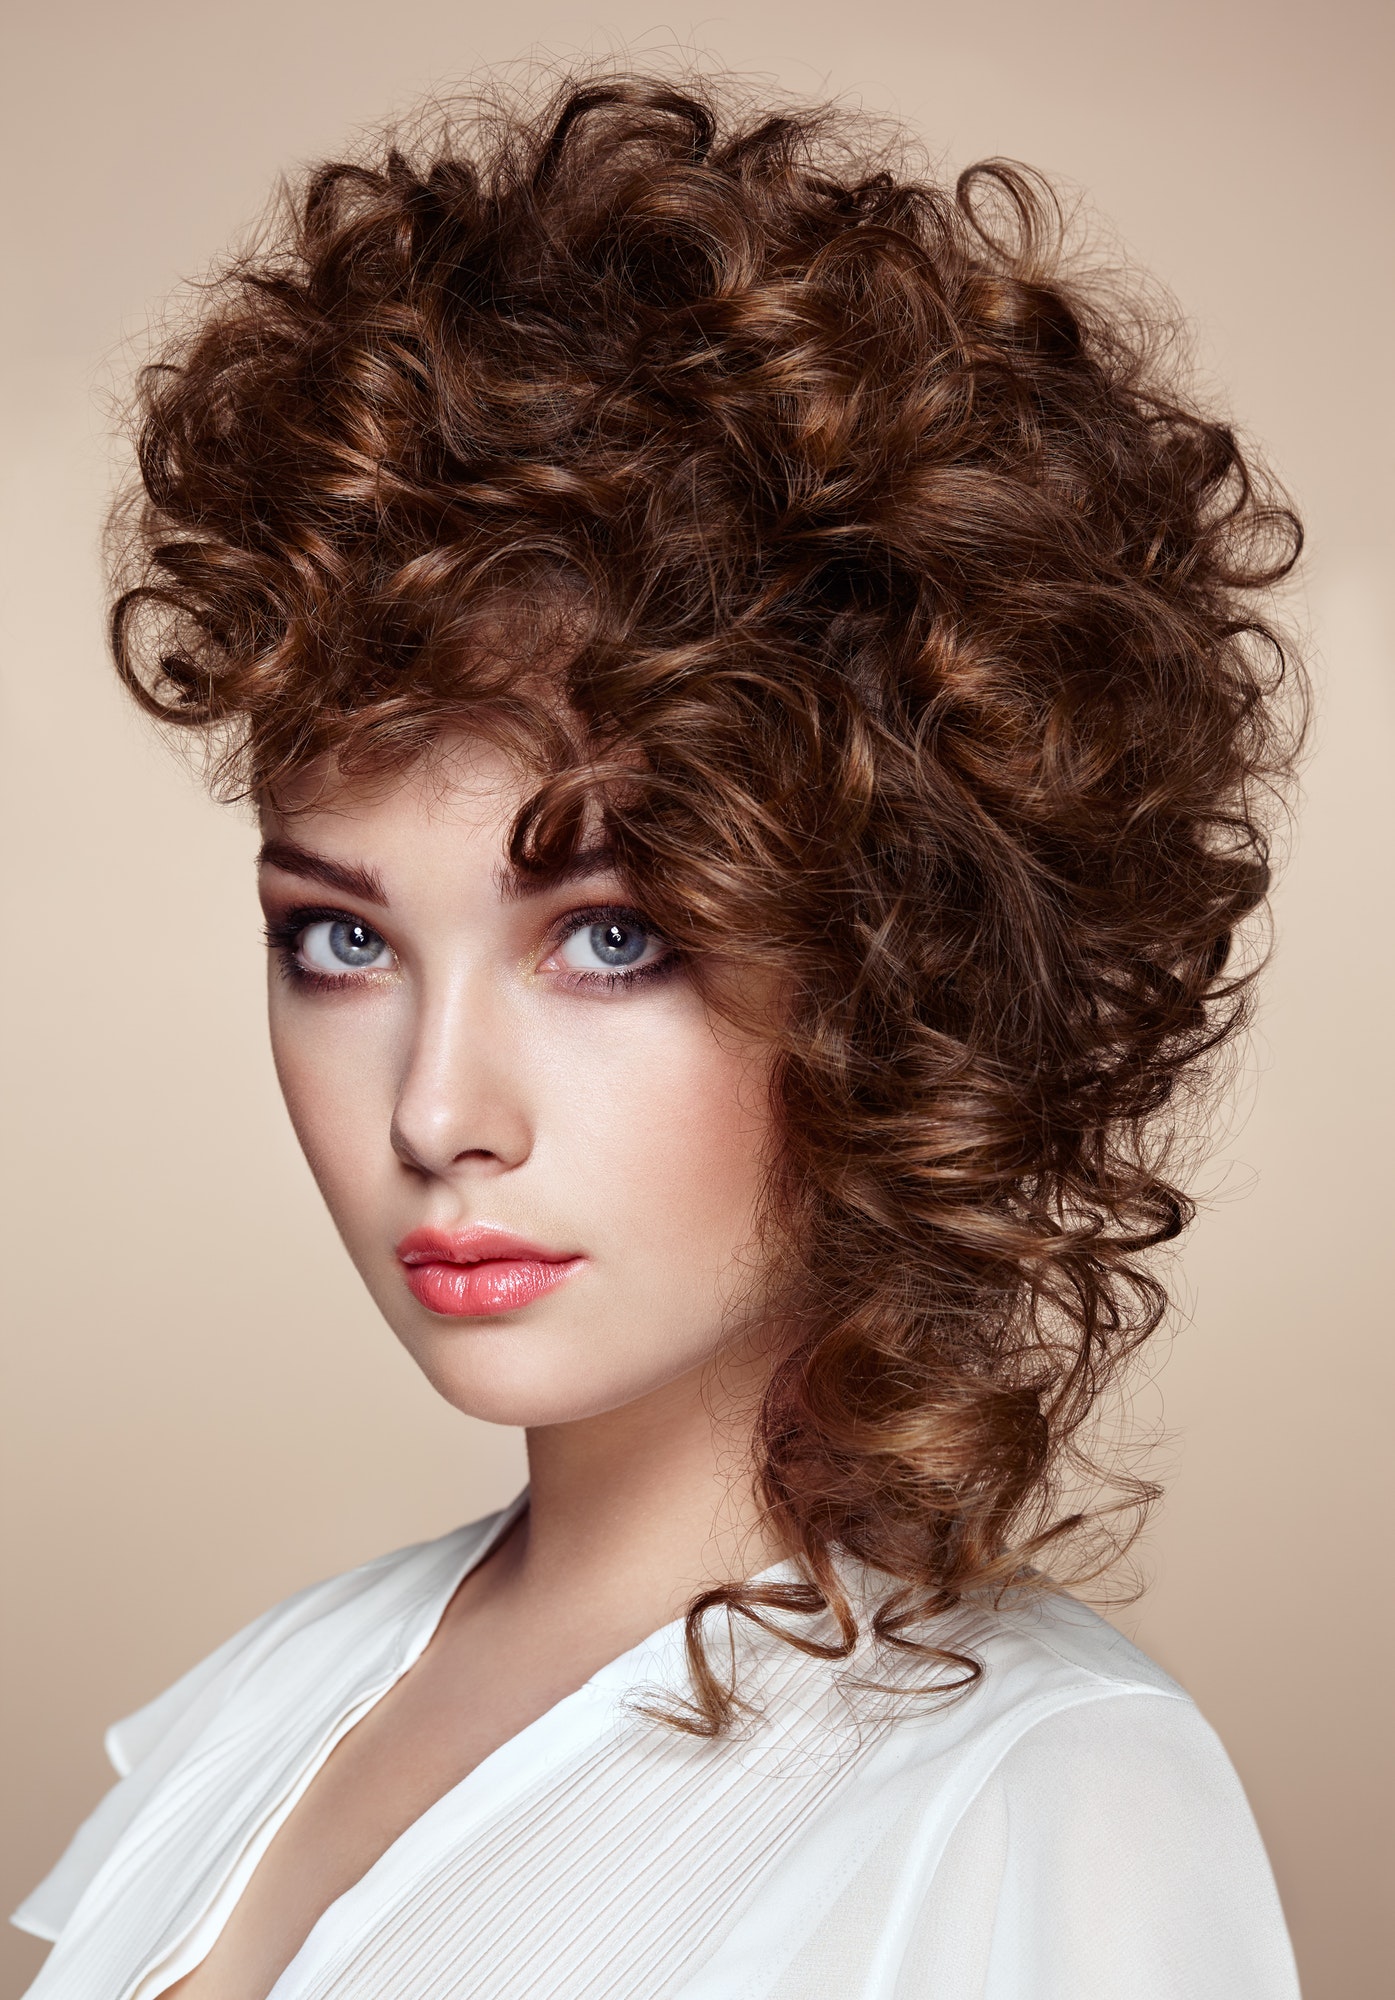 Brunette woman with curly and shiny hair